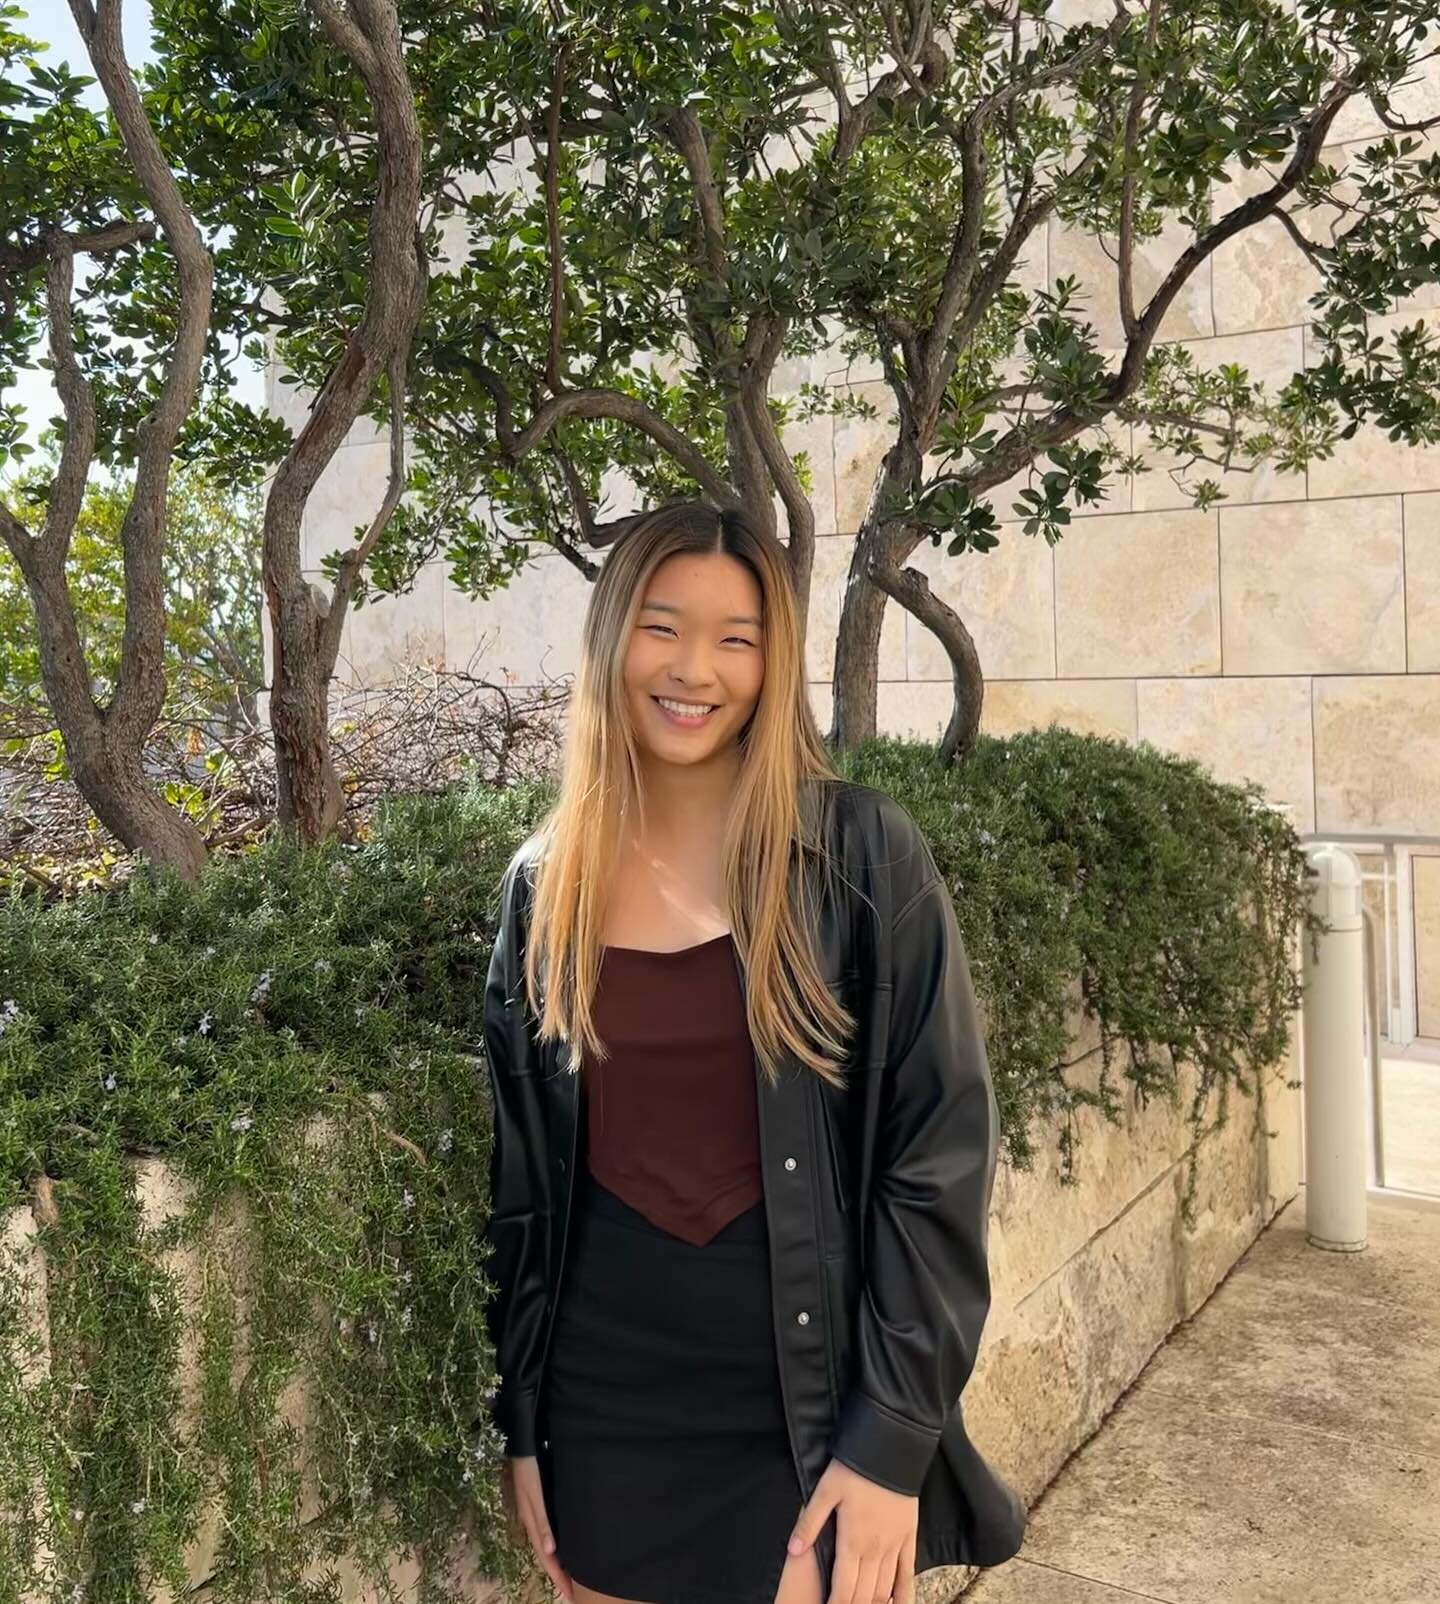 happy belated birthday to Miss Ellen Ko (S&rsquo;22)! we hope you have had an amazing birthday 🥳